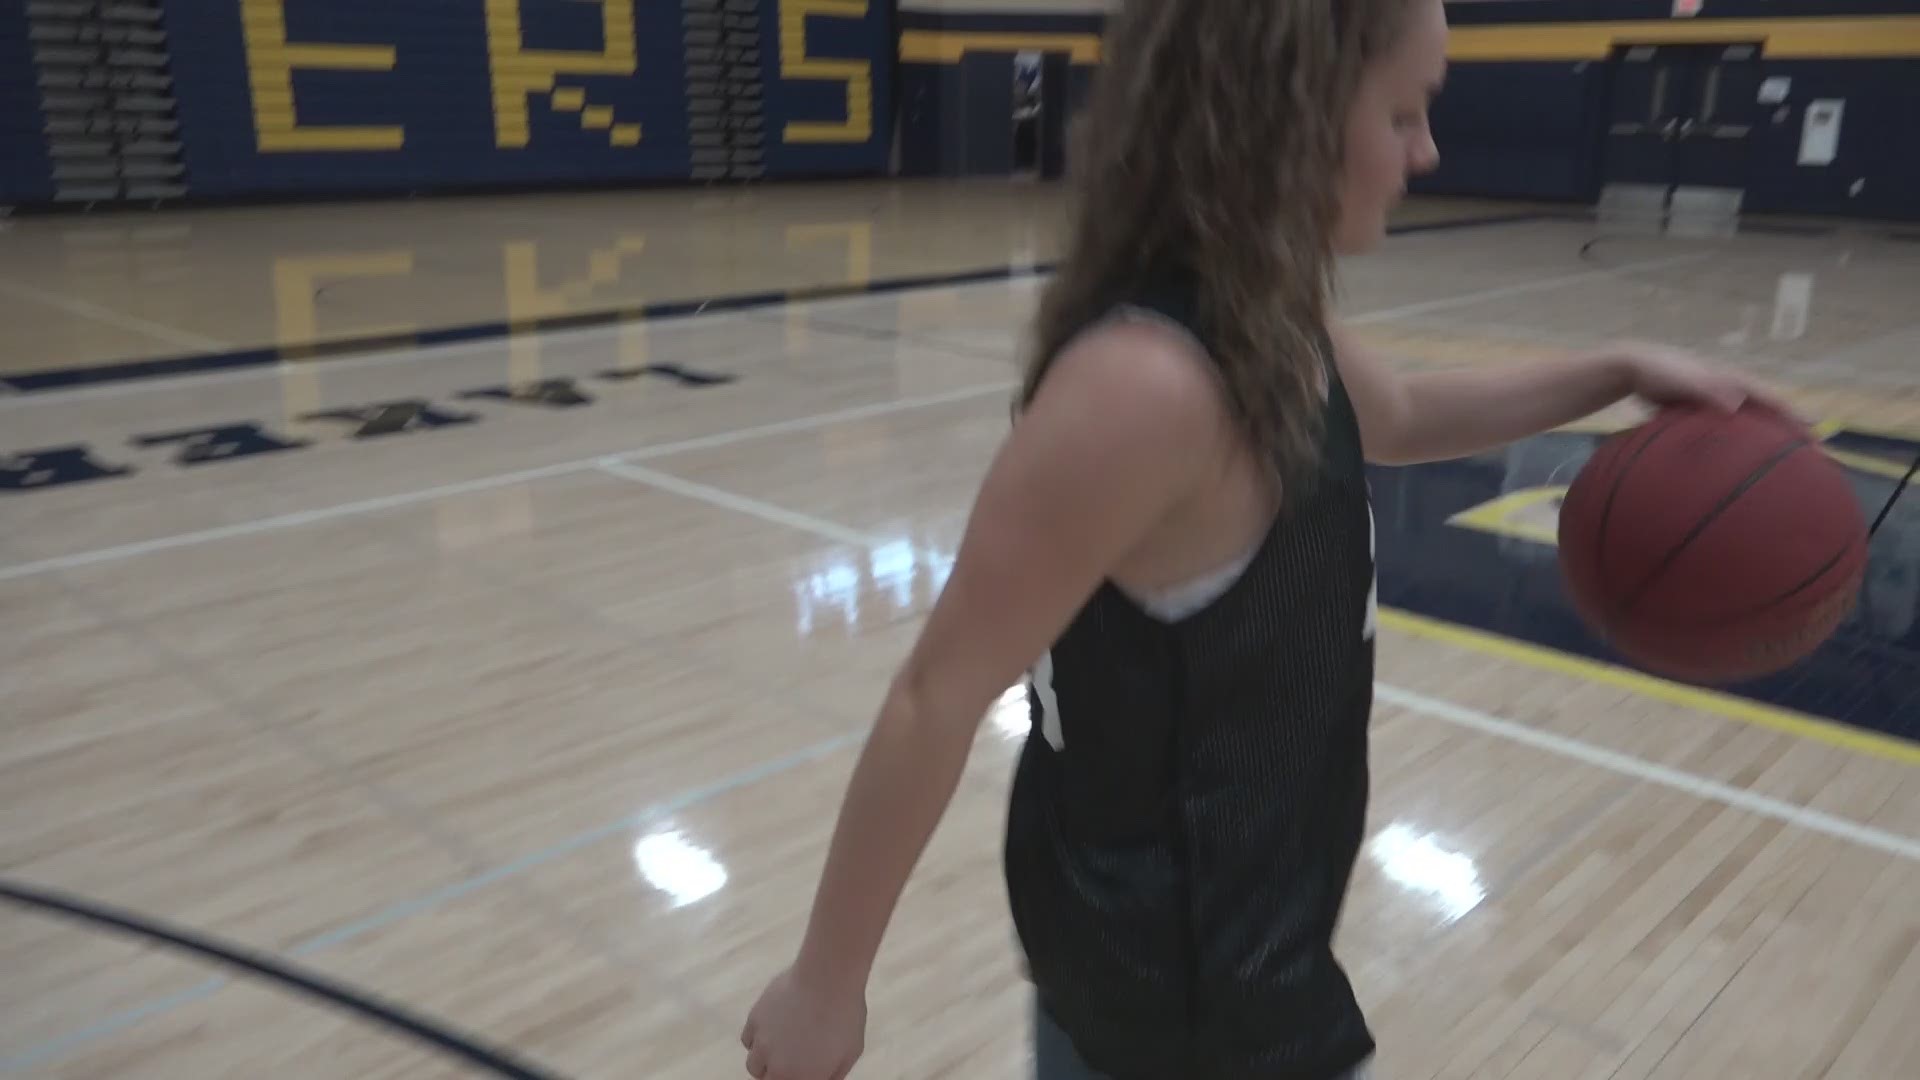 Whether it be on the court, the field or the ice, women are making major moves in Minnesota sports. KARE 11's Kiya Edwards takes a look at the success, and what it means for the future of women's sports in the state. https://kare11.tv/2G0BoW0